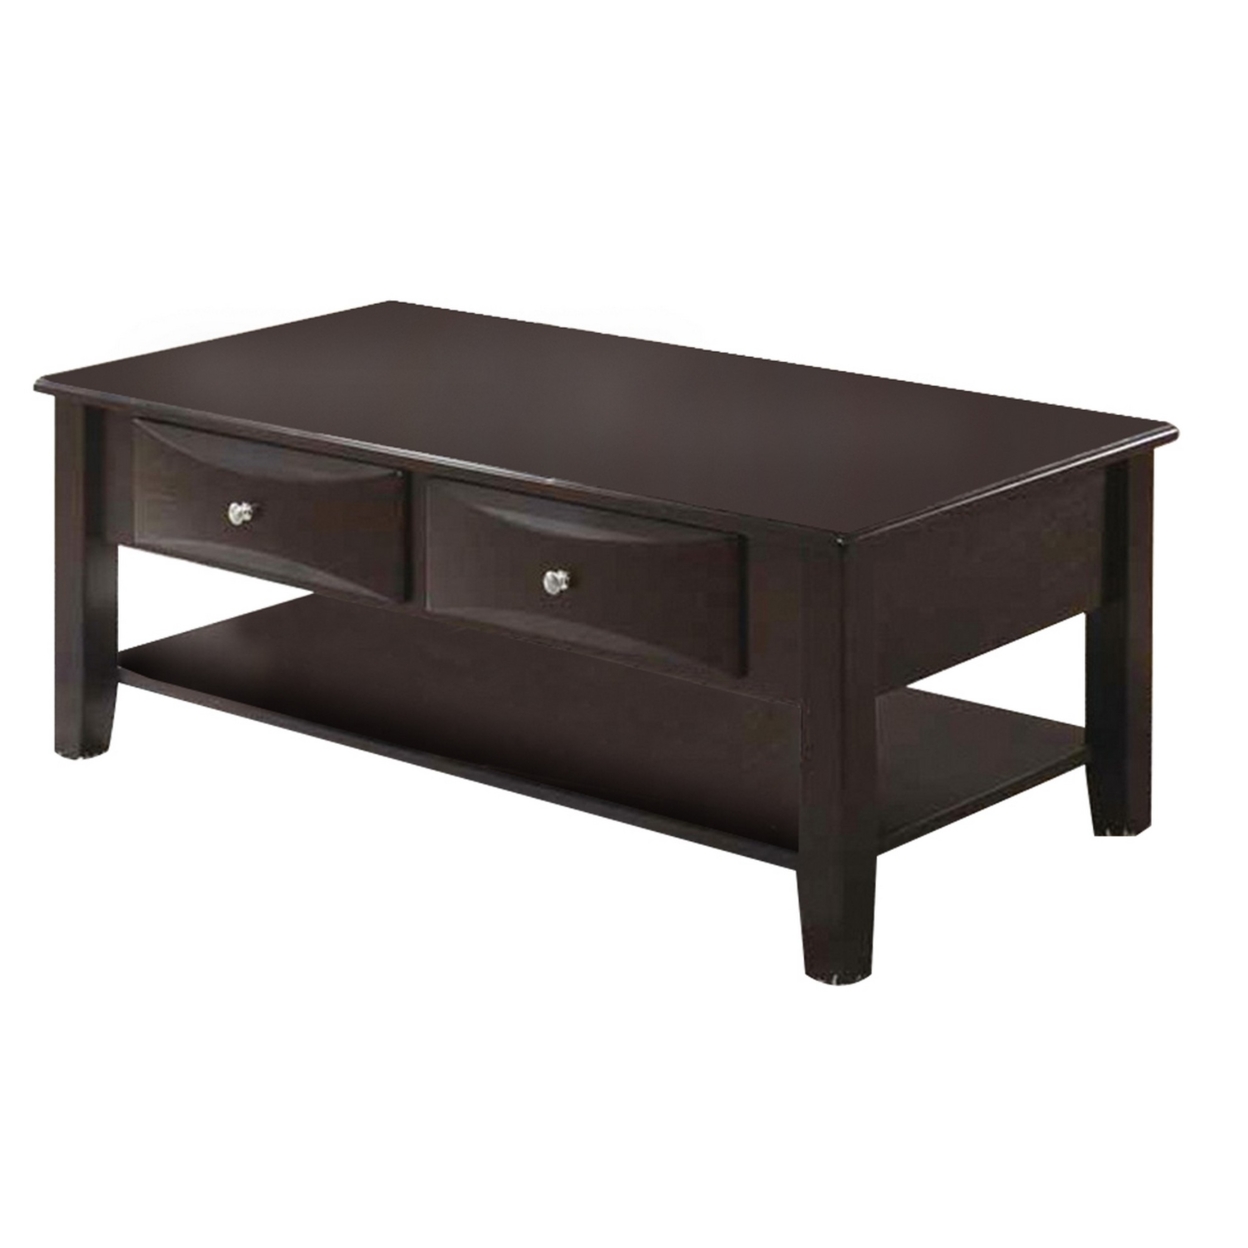 Wooden Coffee Table With 2 Spacious Drawers, Brown- Saltoro Sherpi